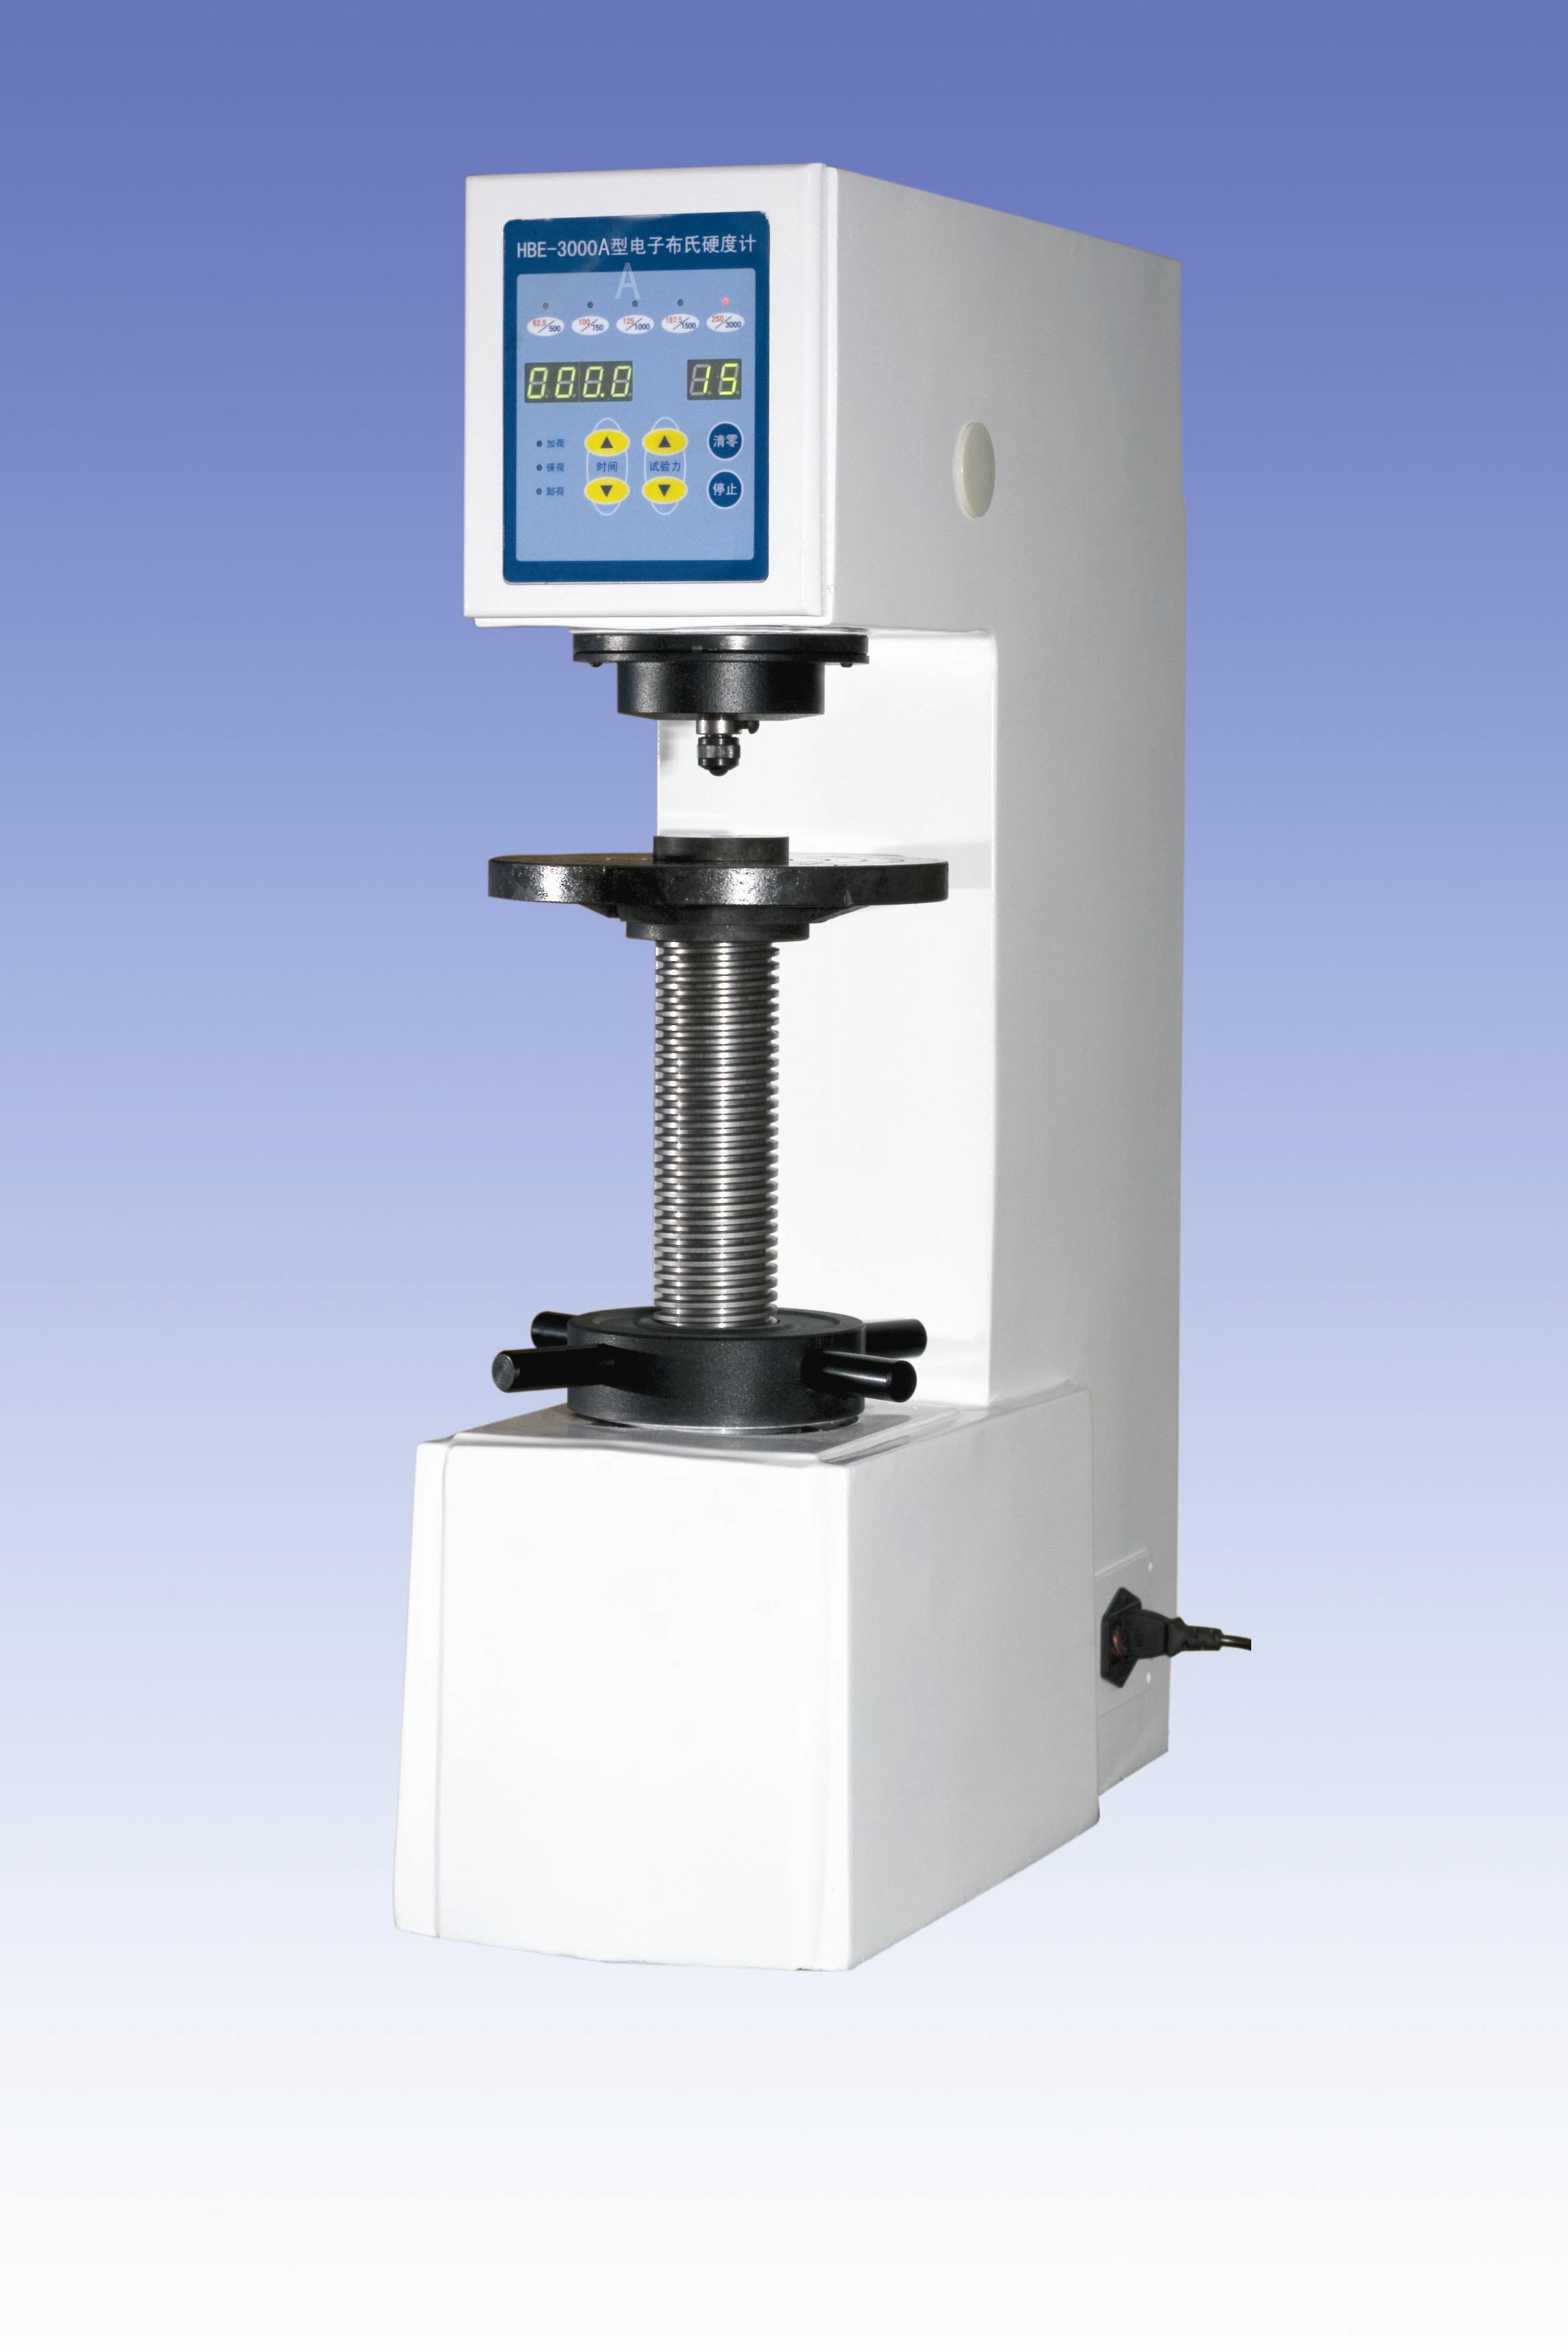 Brinell Hardness Tester HBE-3000A